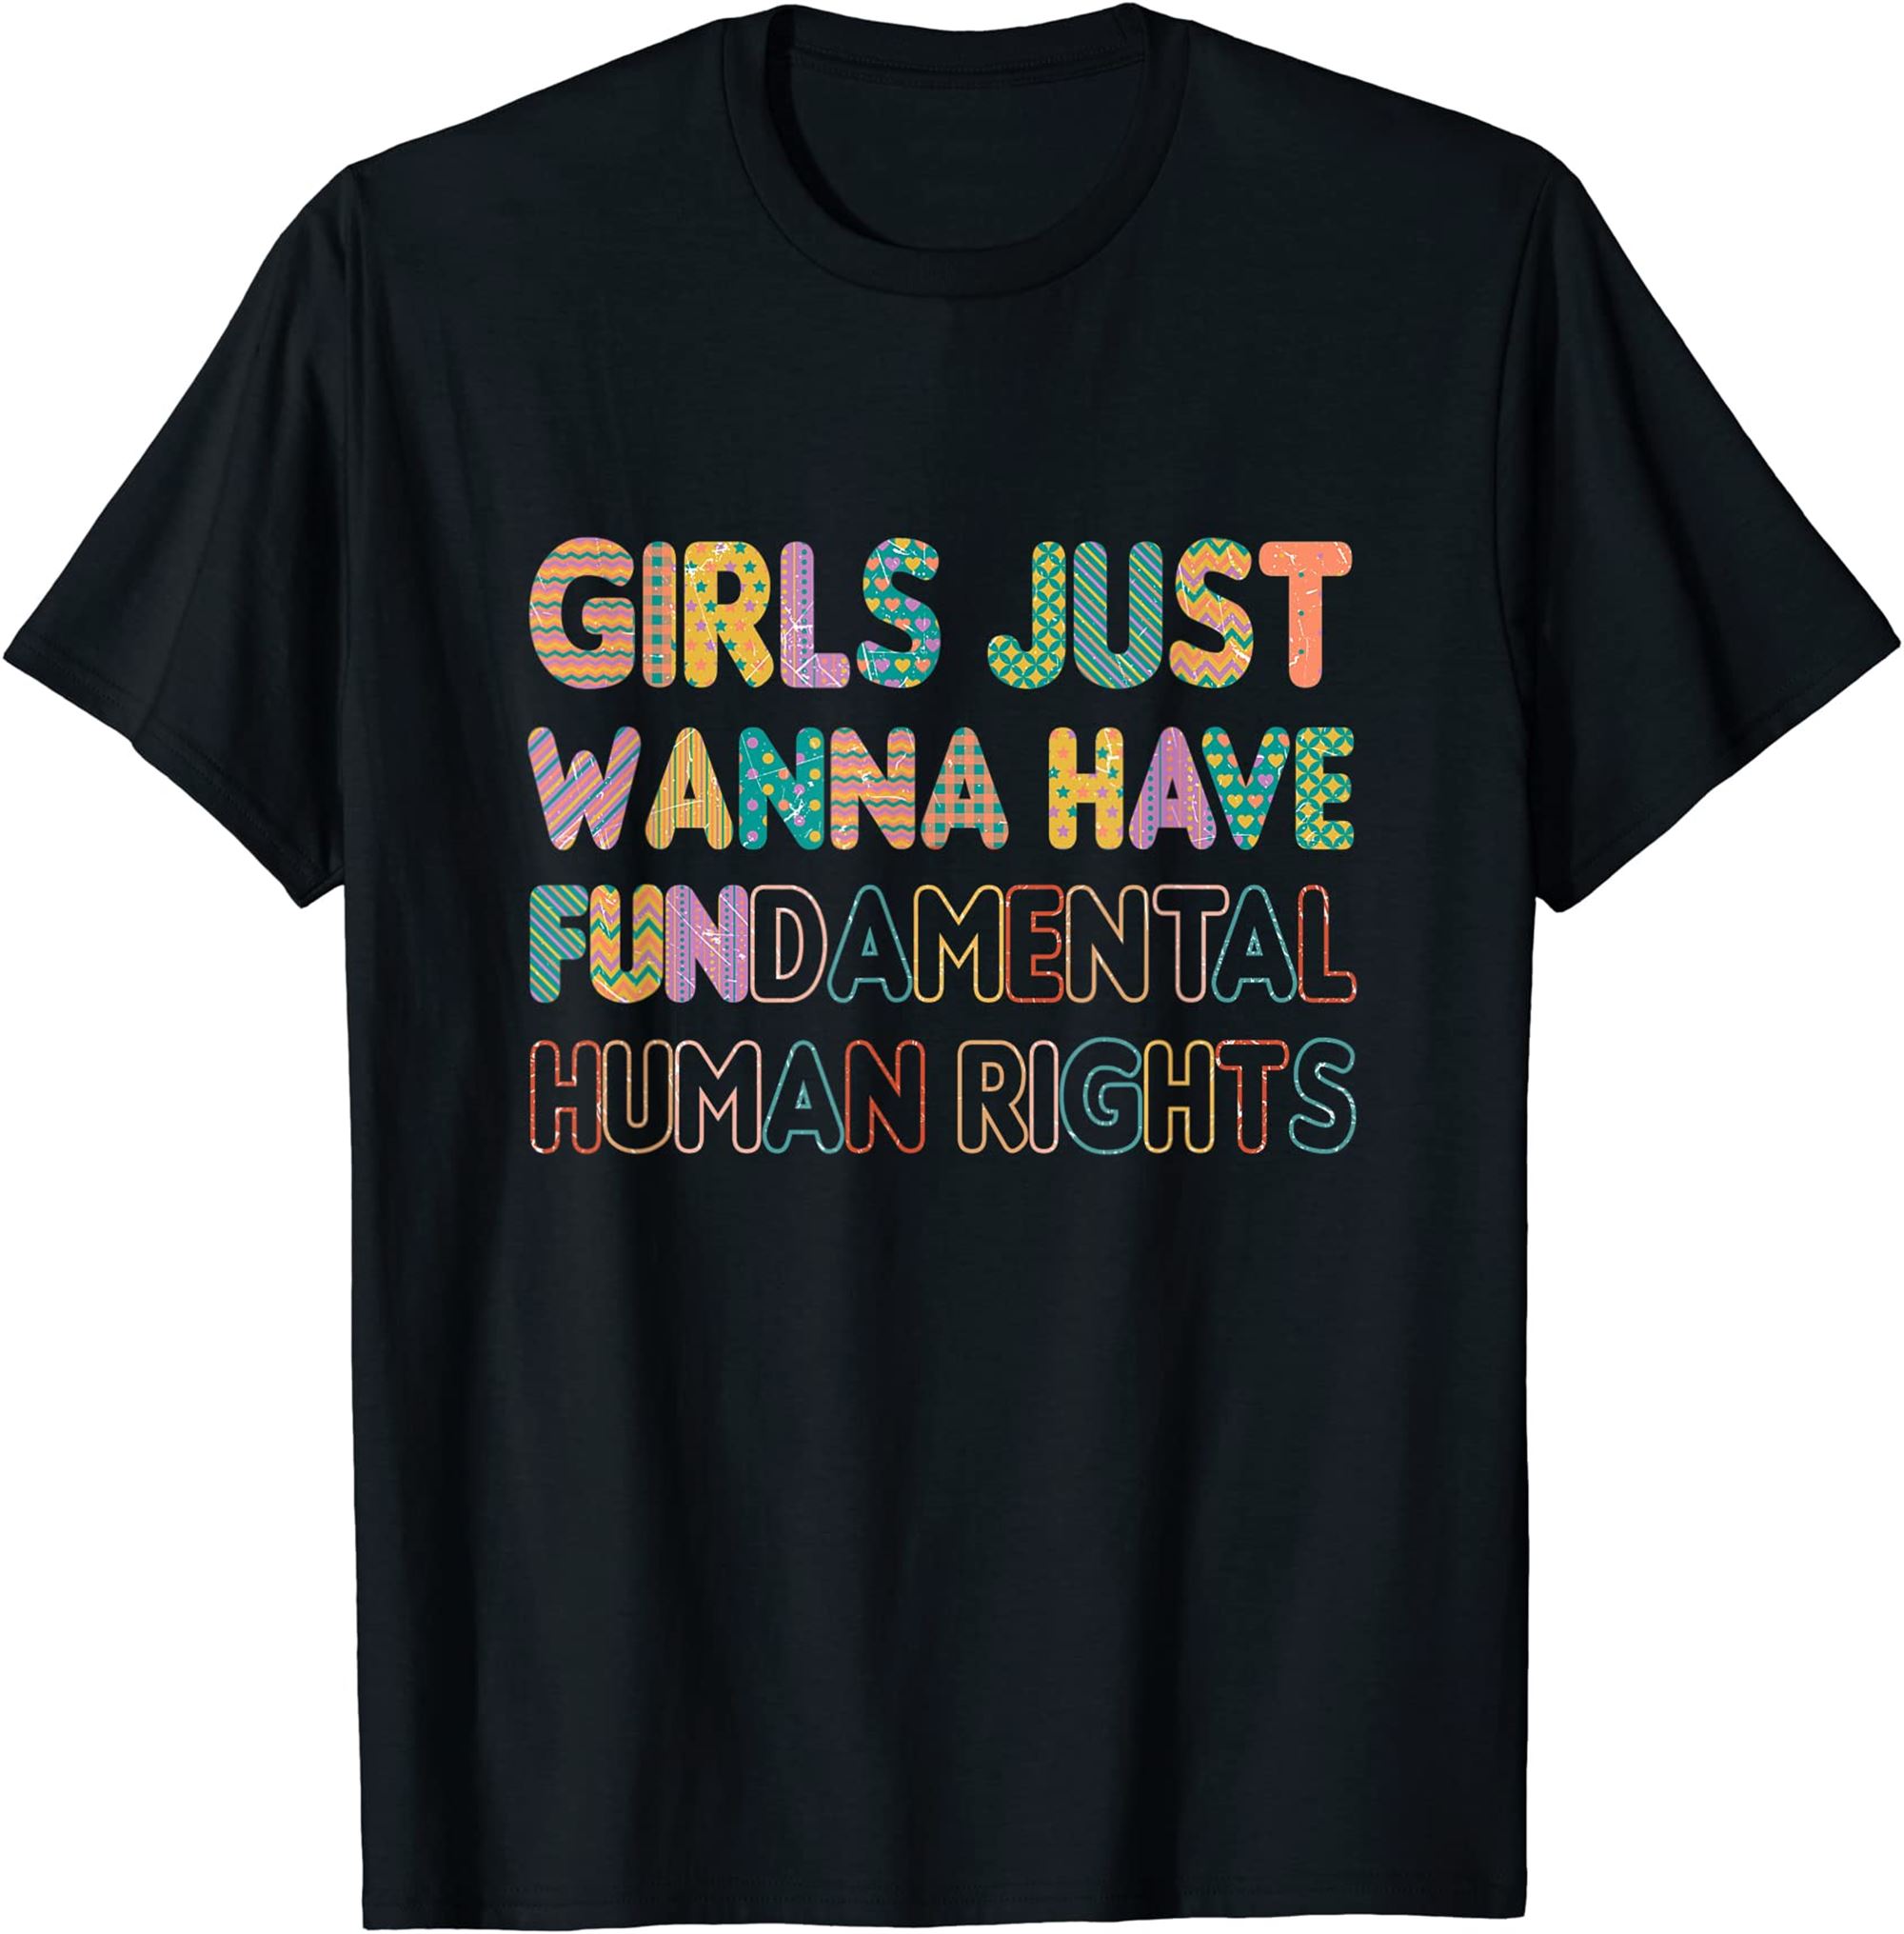 Girls Just Want To Have Fundamental Rights Funny T-shirt Full Size Up To 5xl